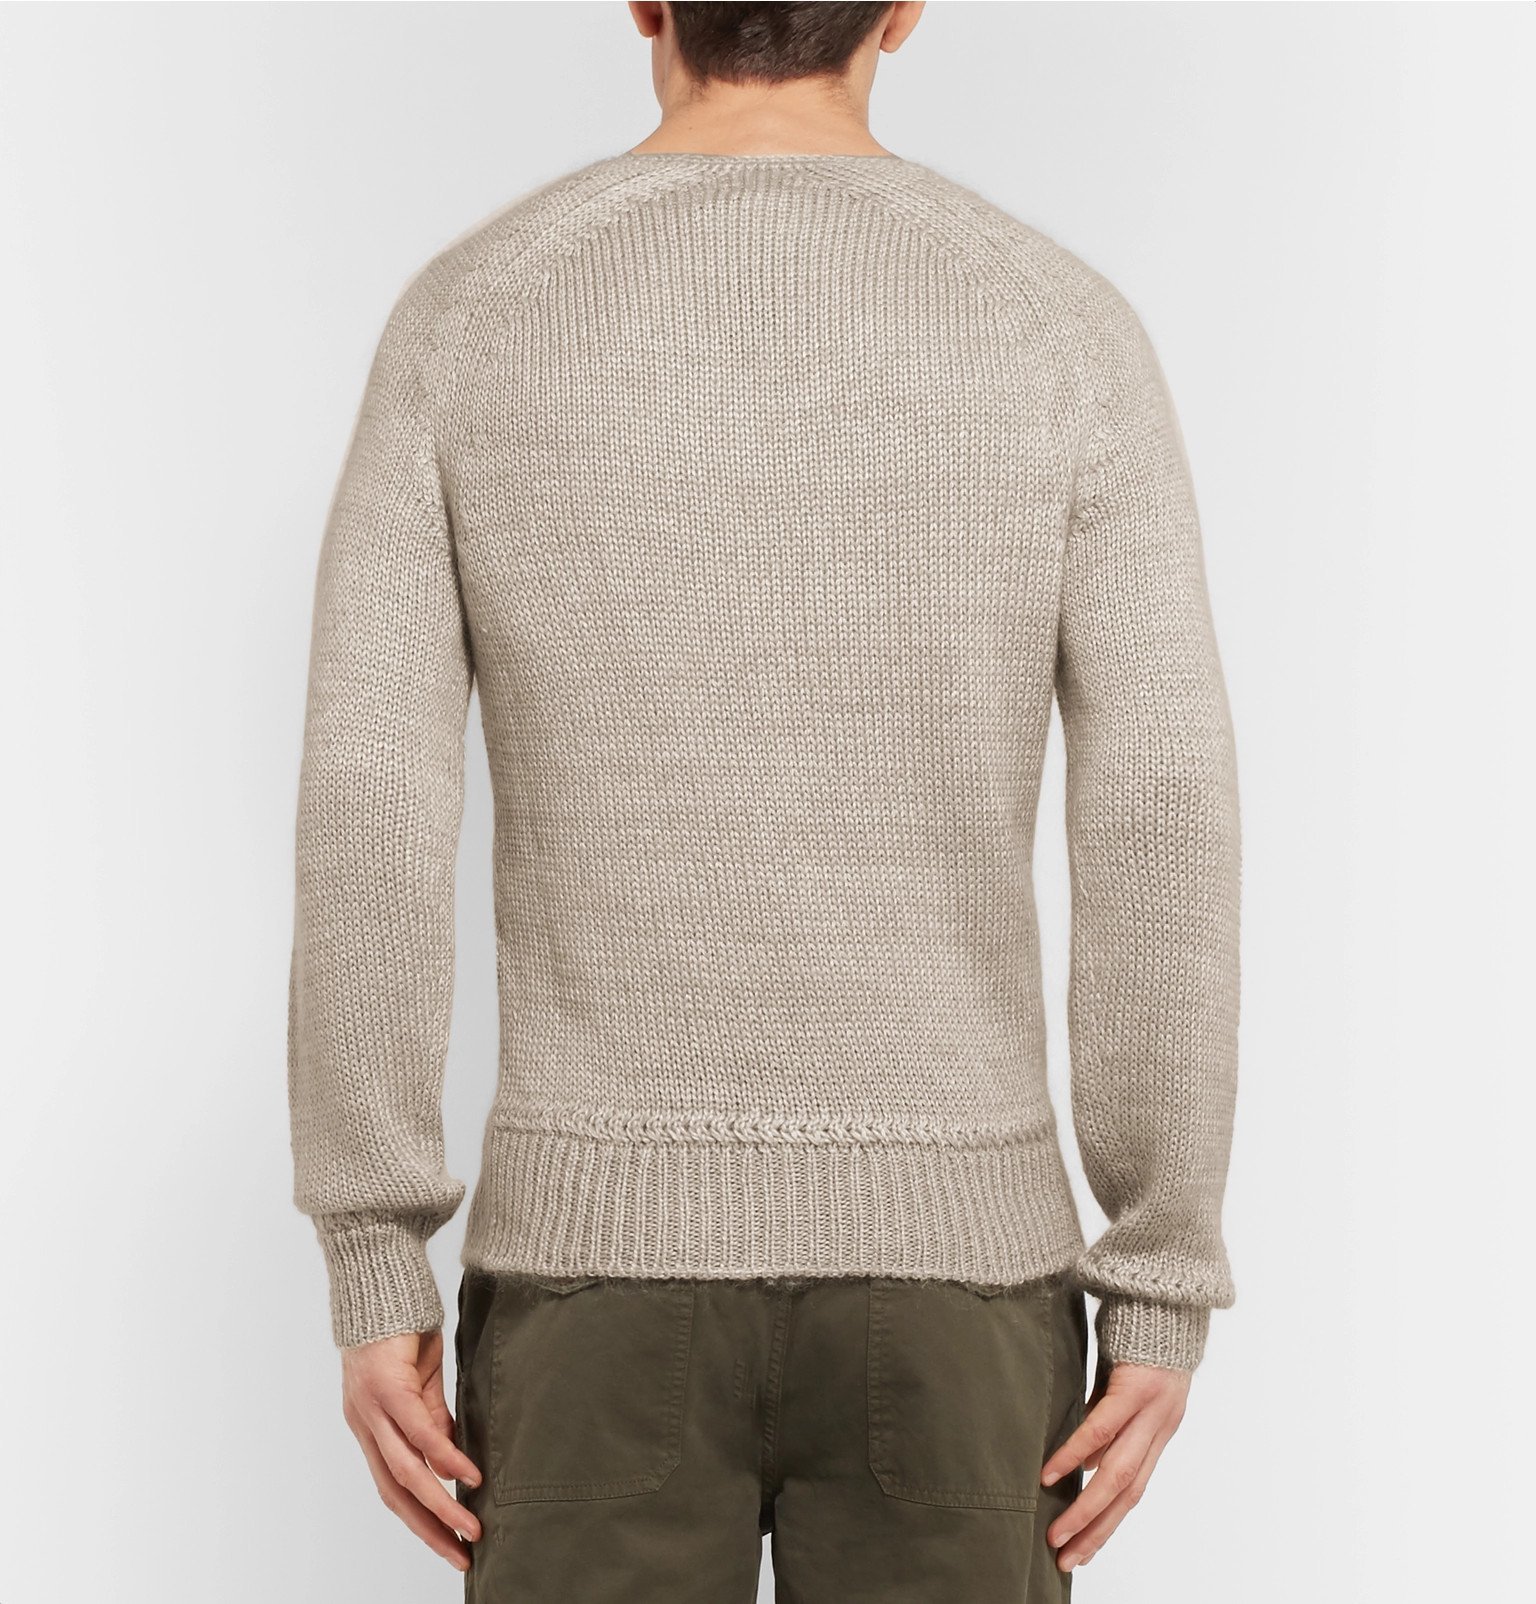 TOM FORD - Mulberry Silk and Mohair-Blend Sweater - Neutrals TOM FORD